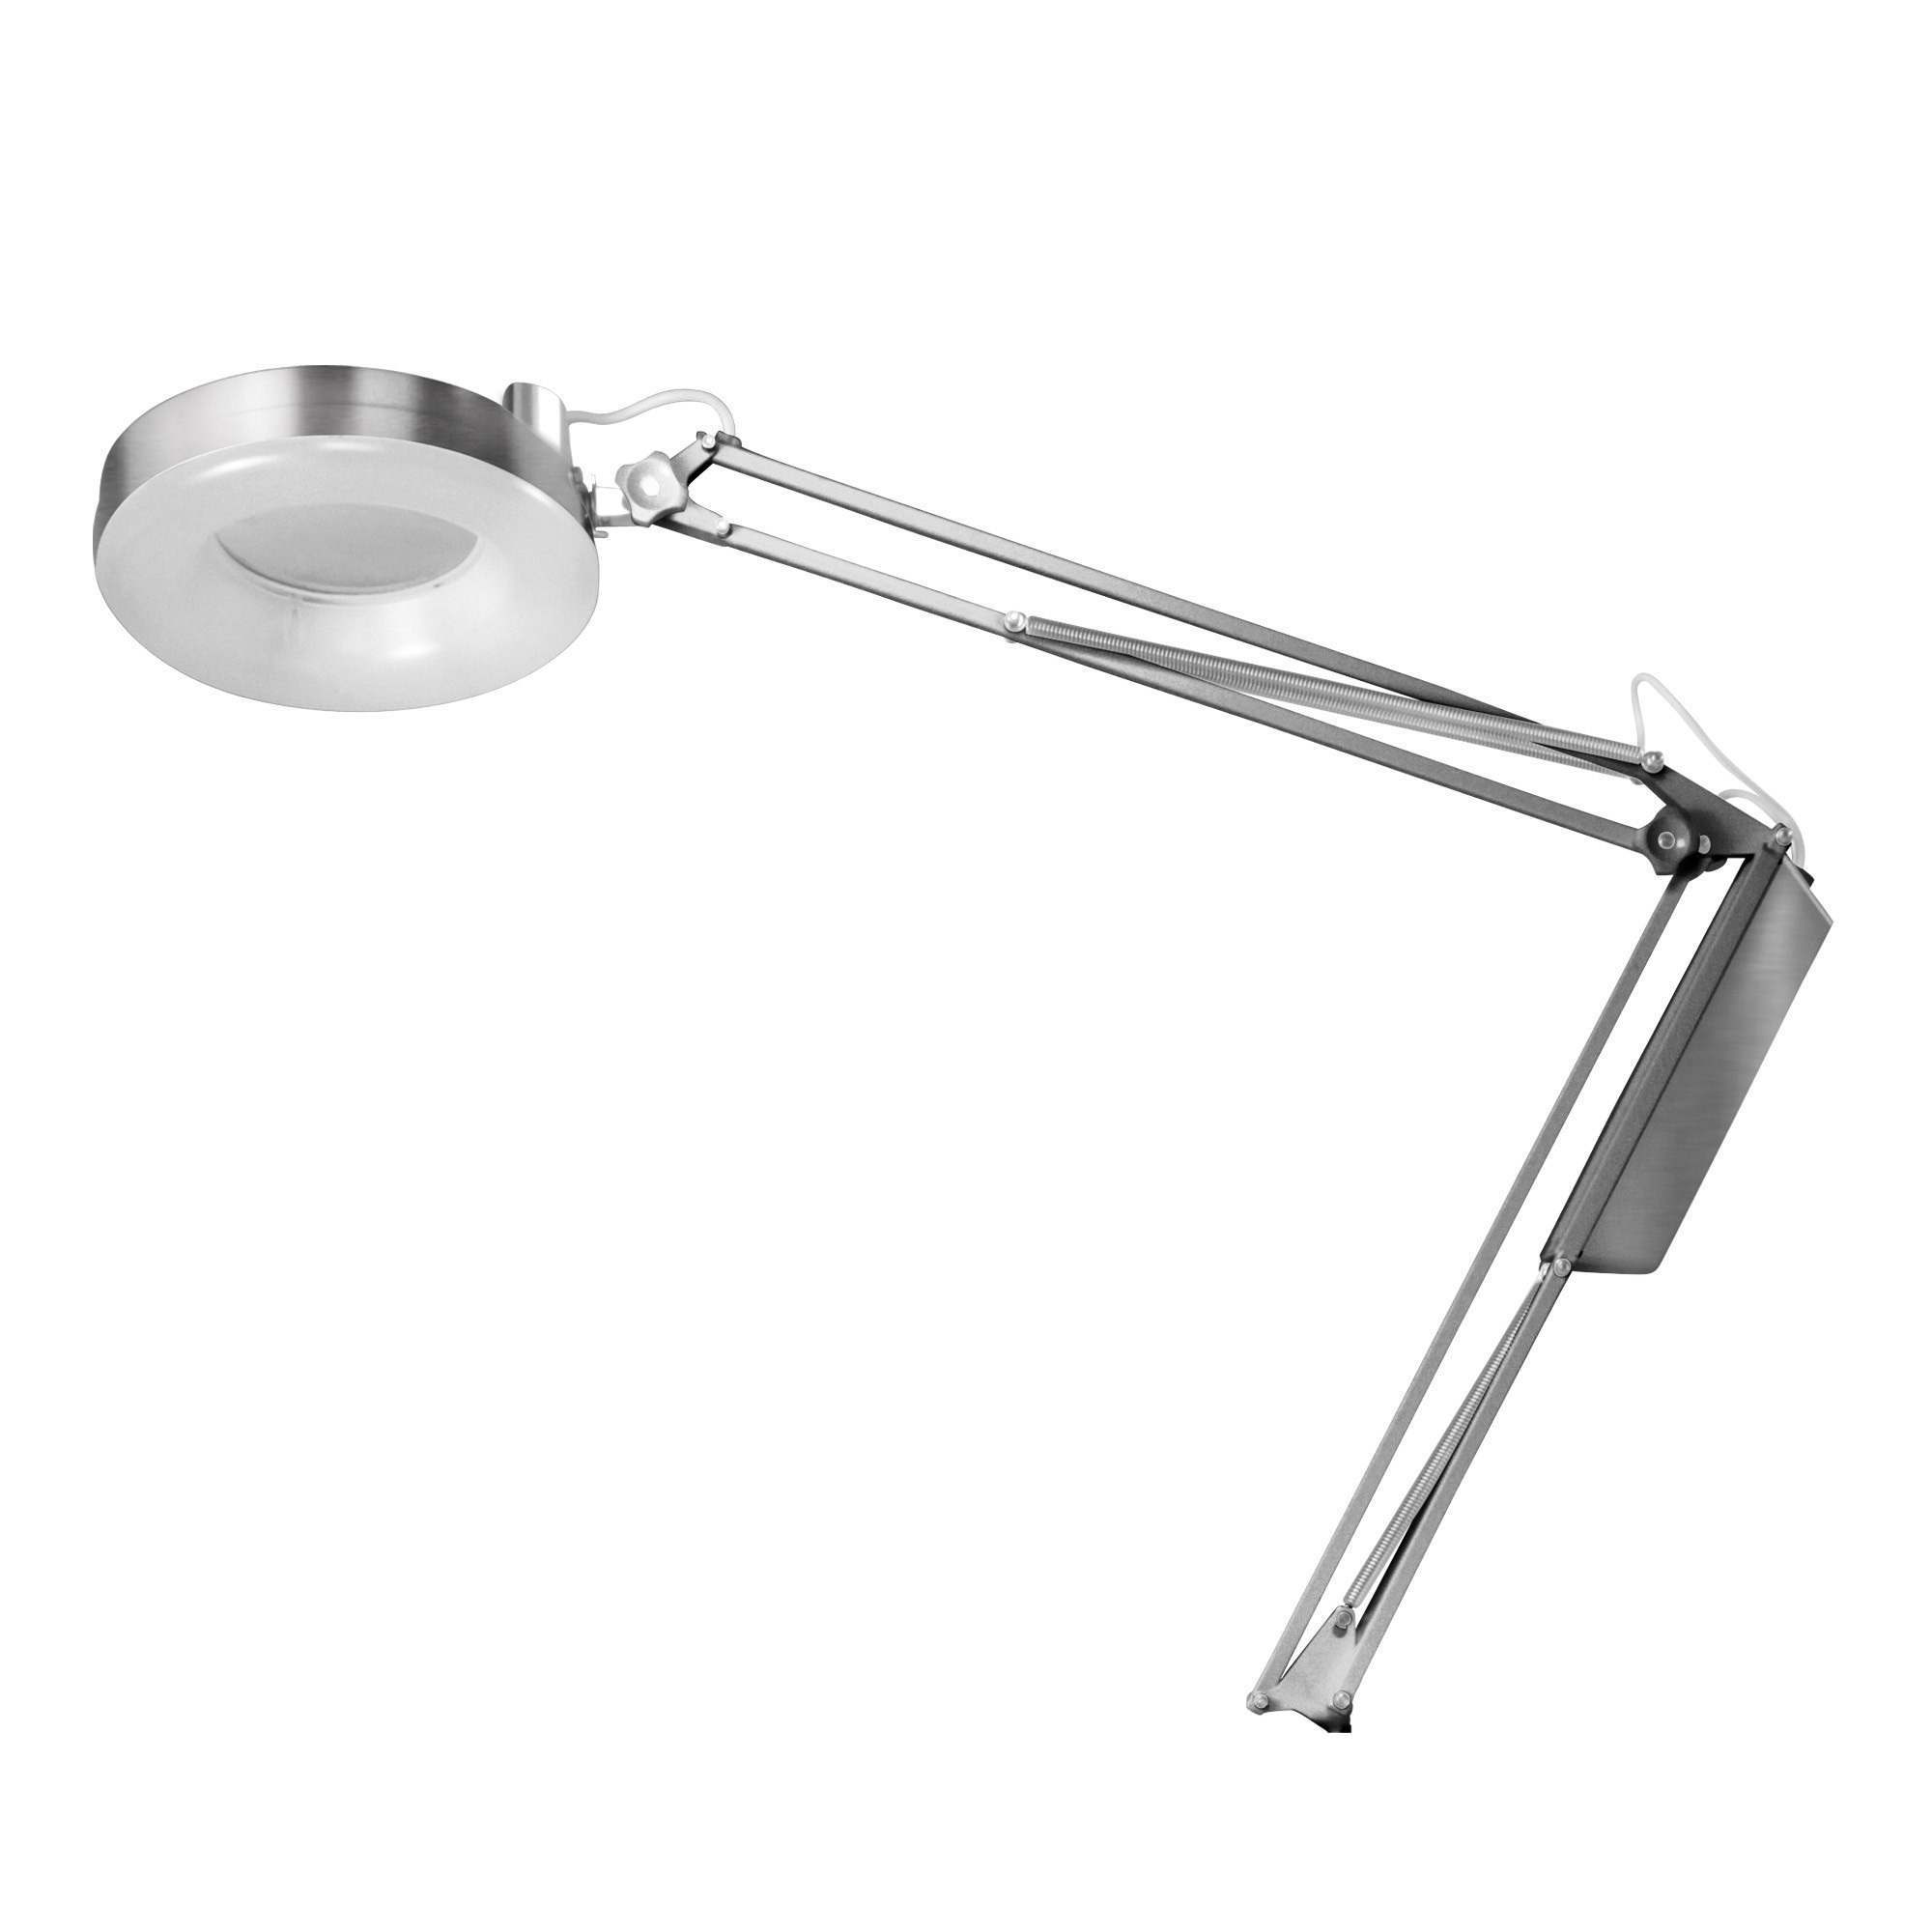 Lampes loupe